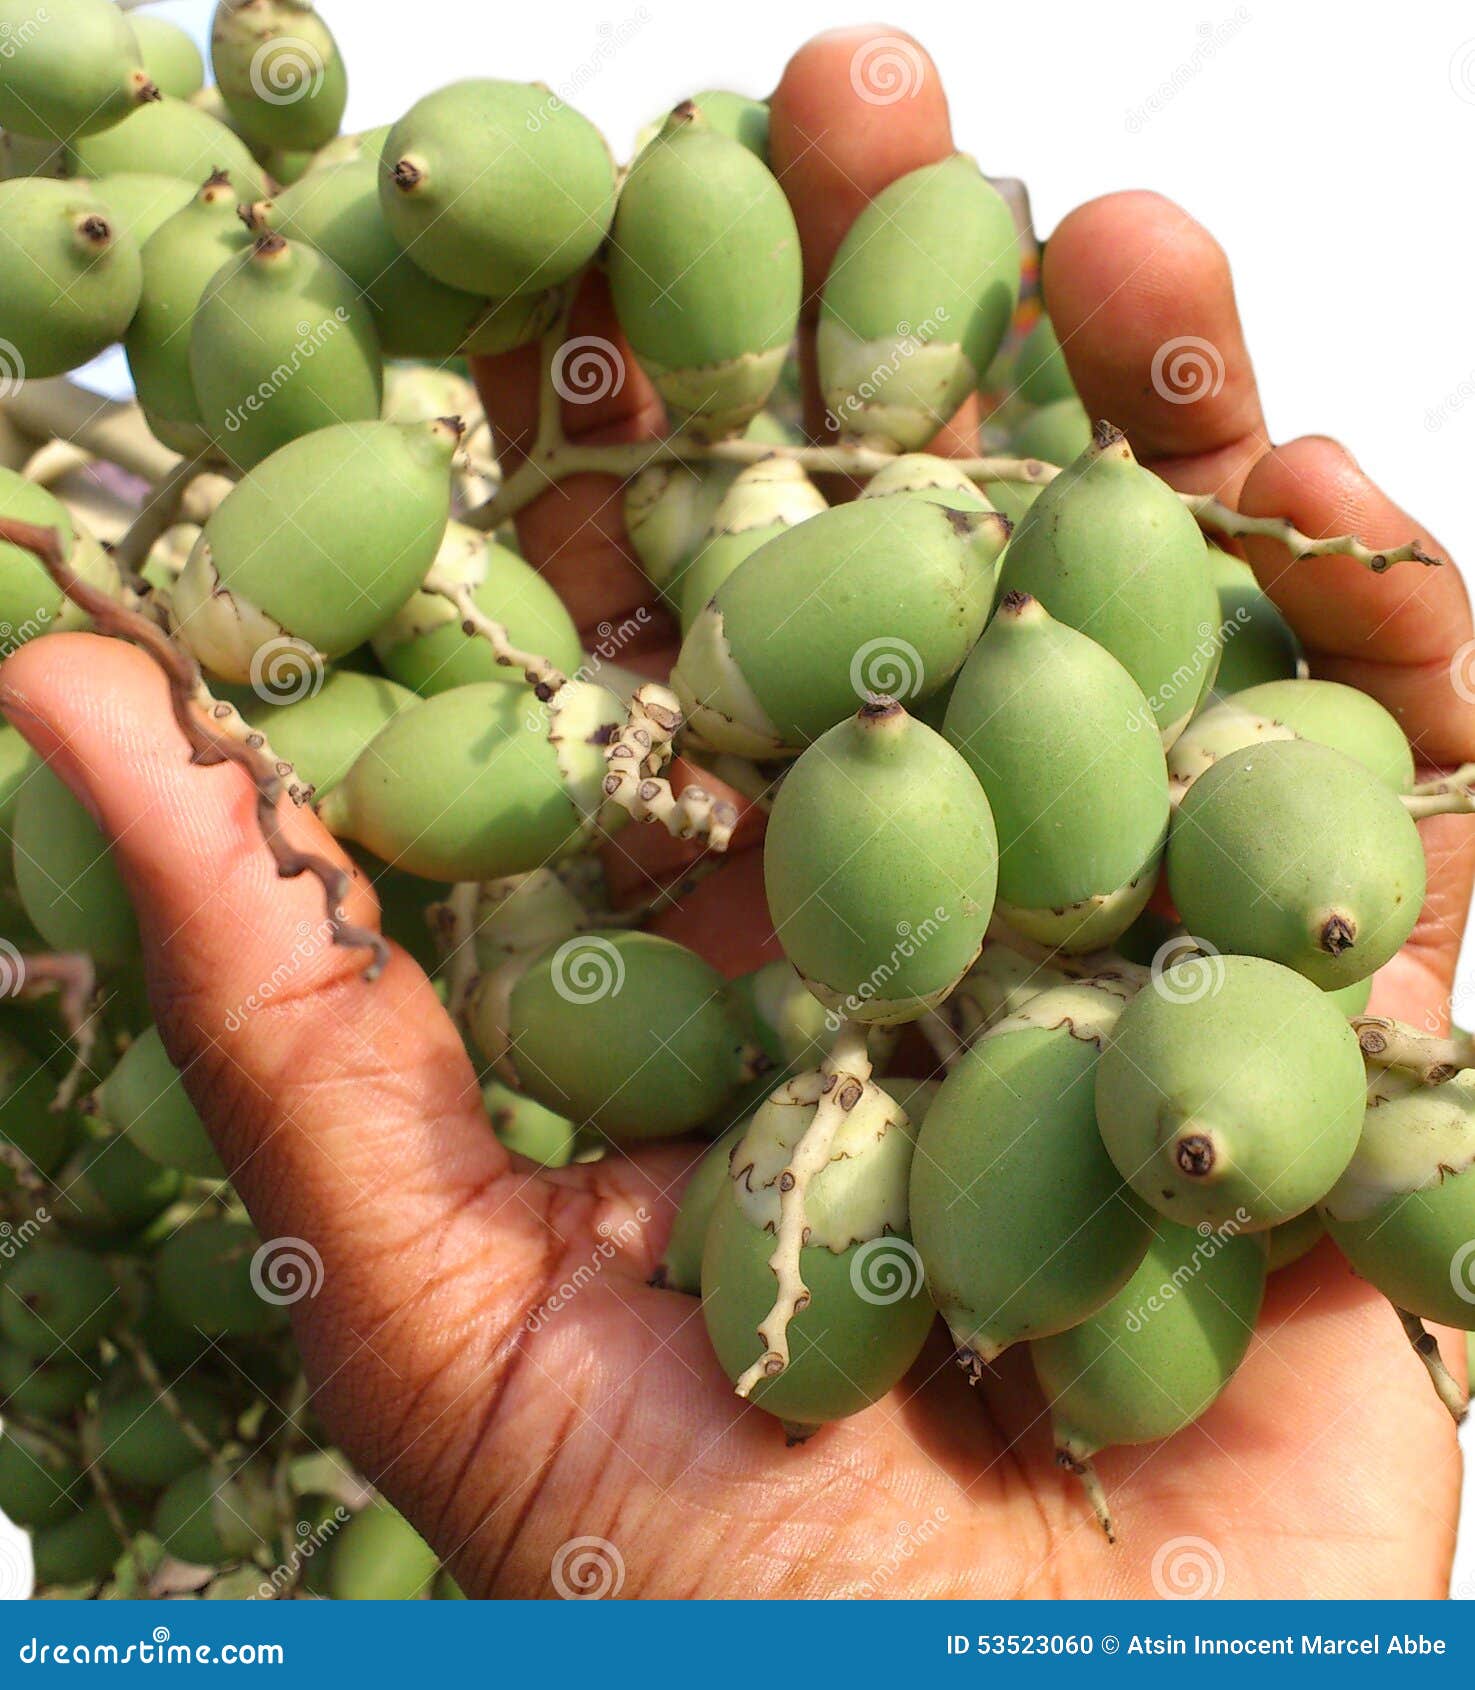 tree and its fruits stock photo - image: 53523060